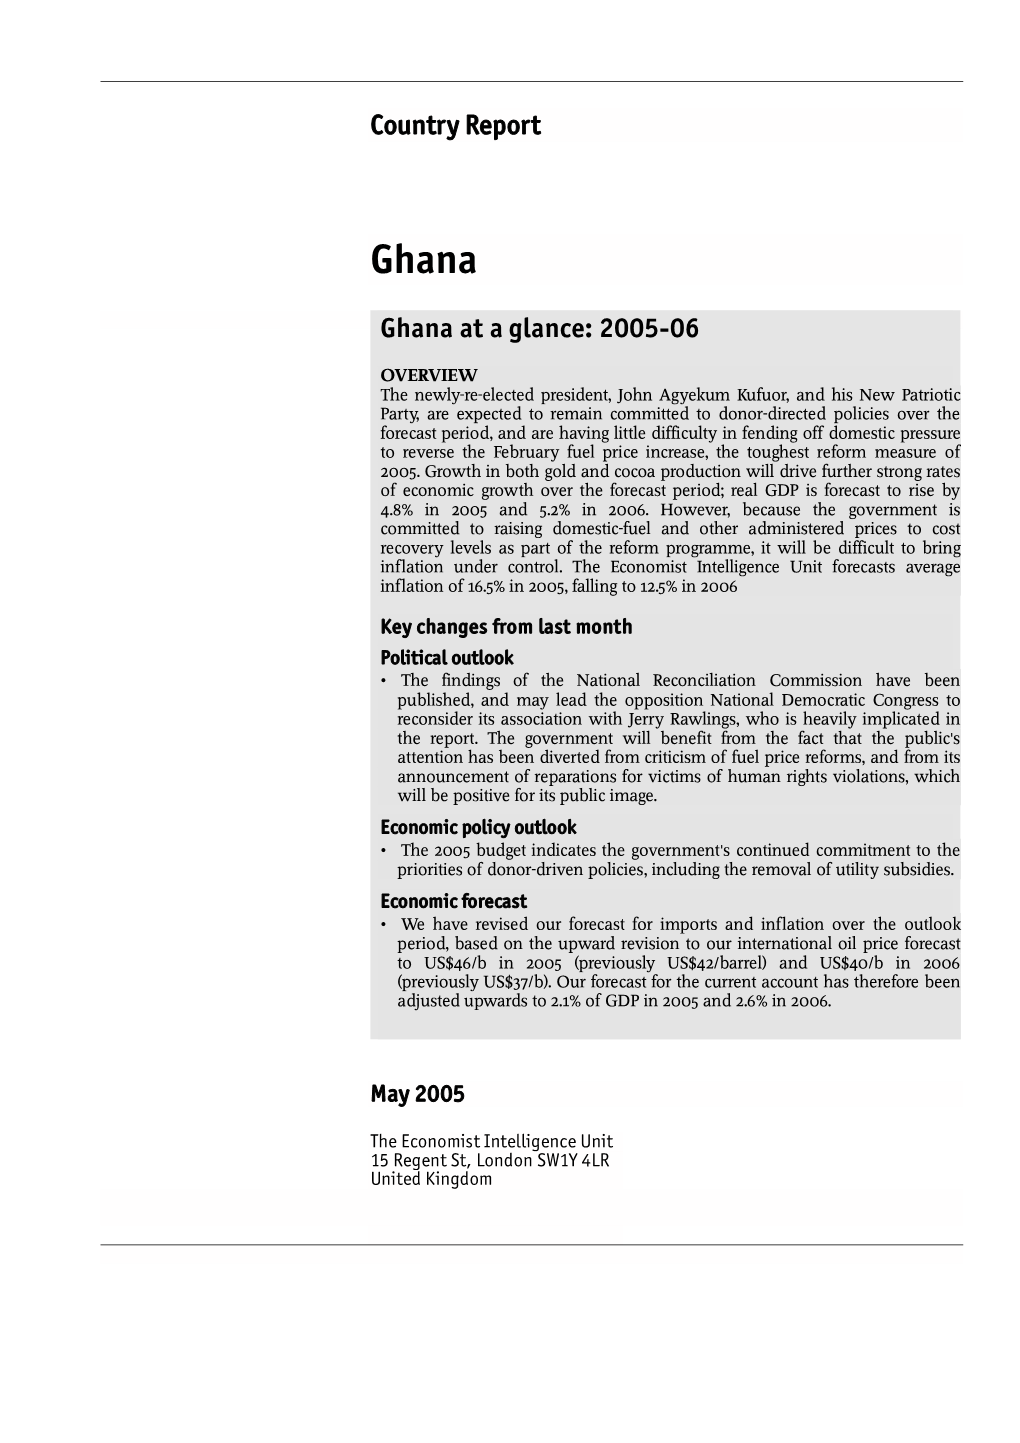 Country Report Ghana at a Glance: 2005-06